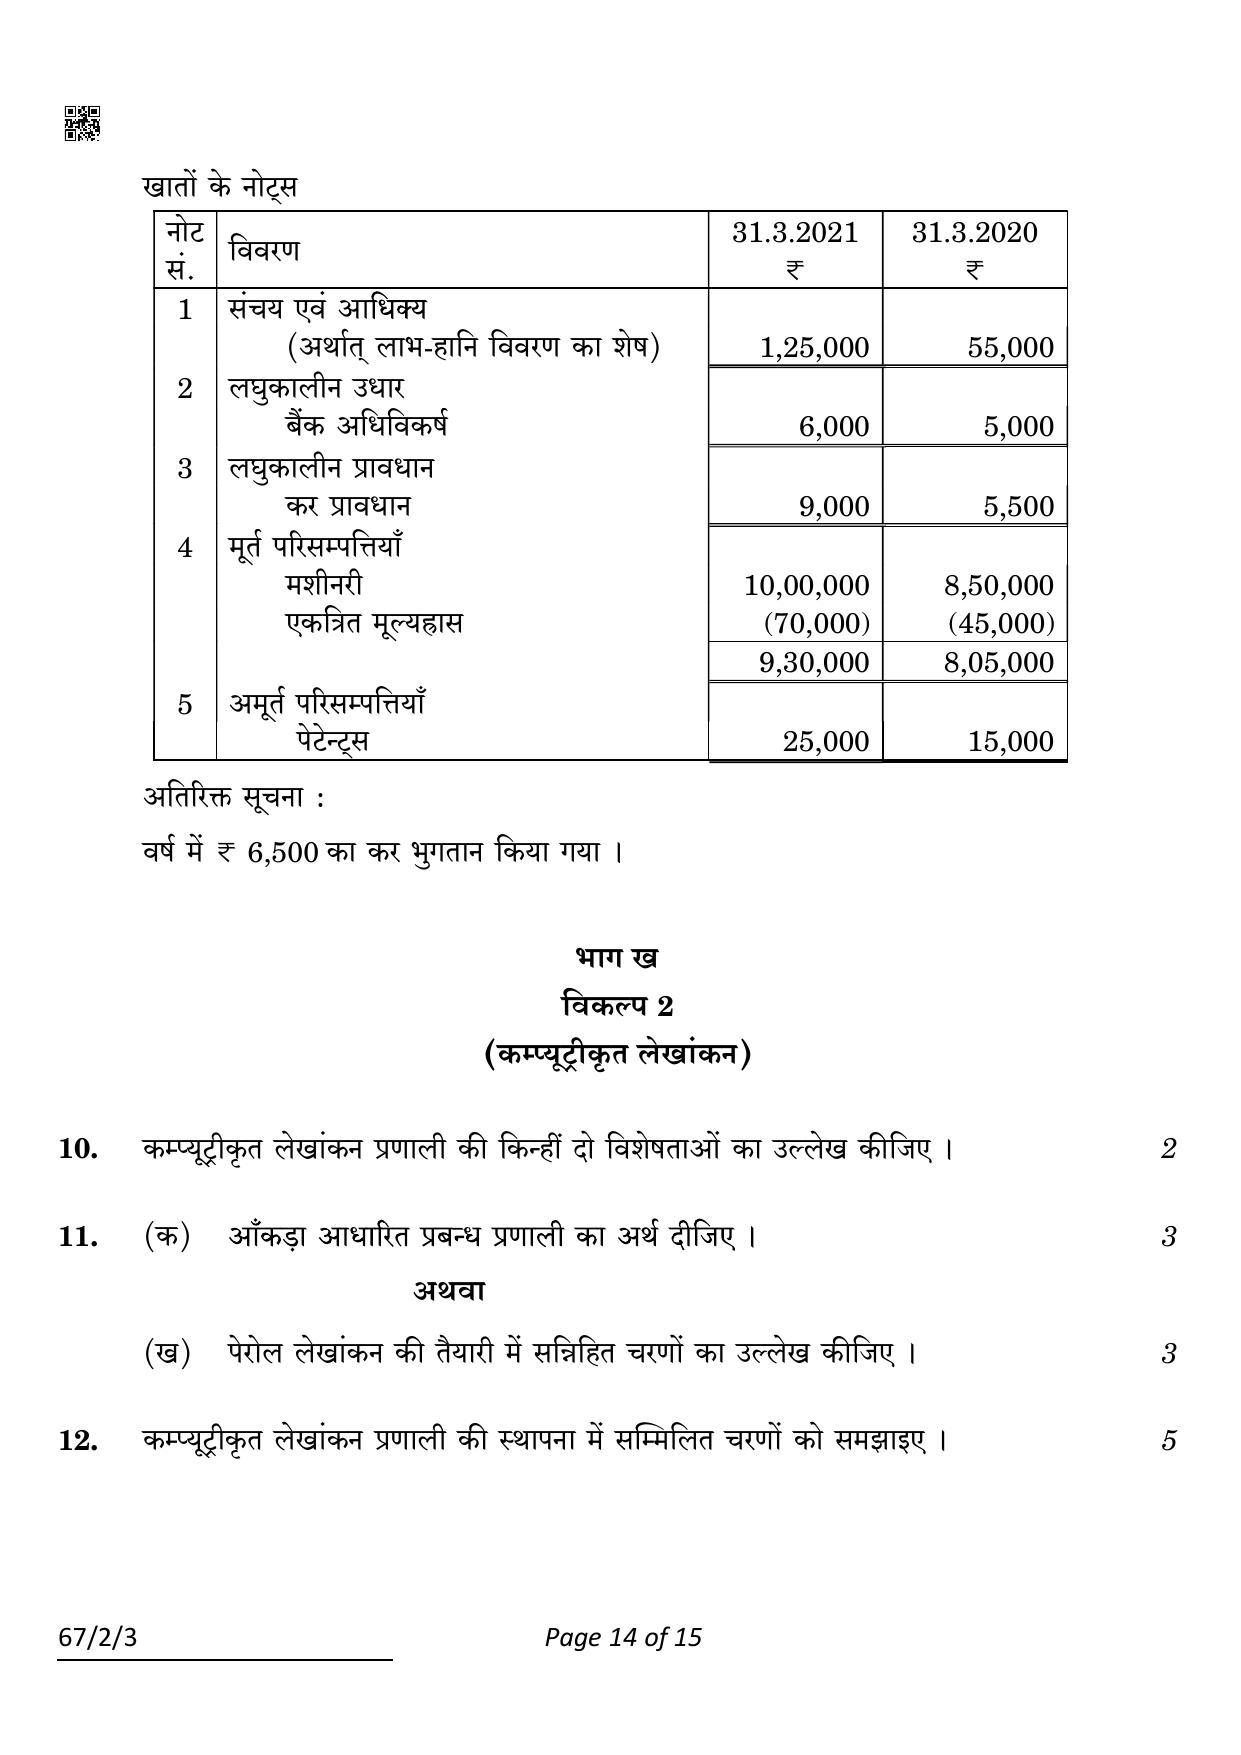 CBSE Class 12 67-2-3 Accountancy 2022 Question Paper - Page 14